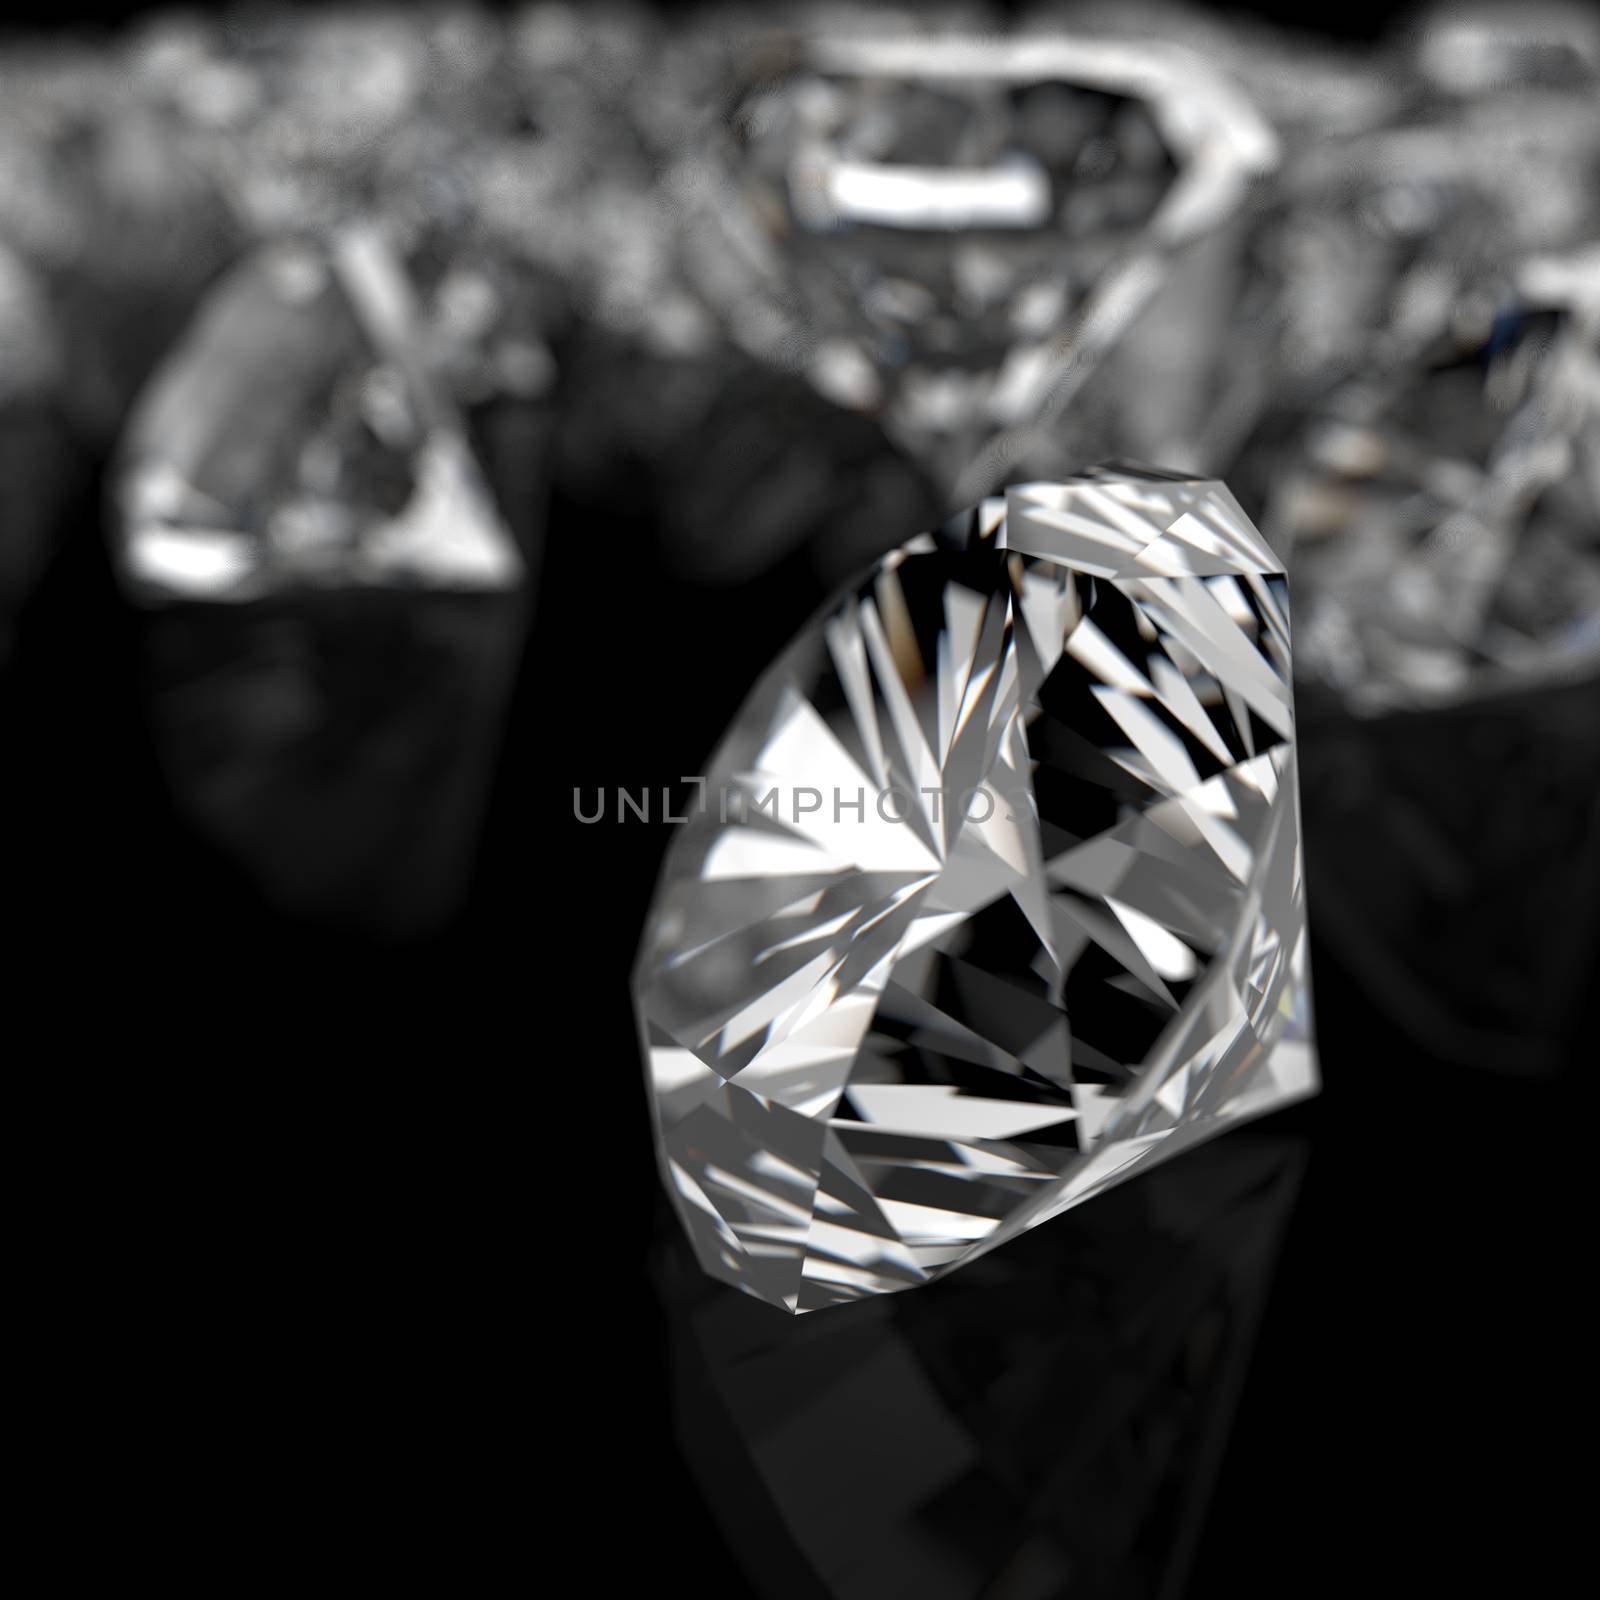 diamonds on black surface by everythingpossible